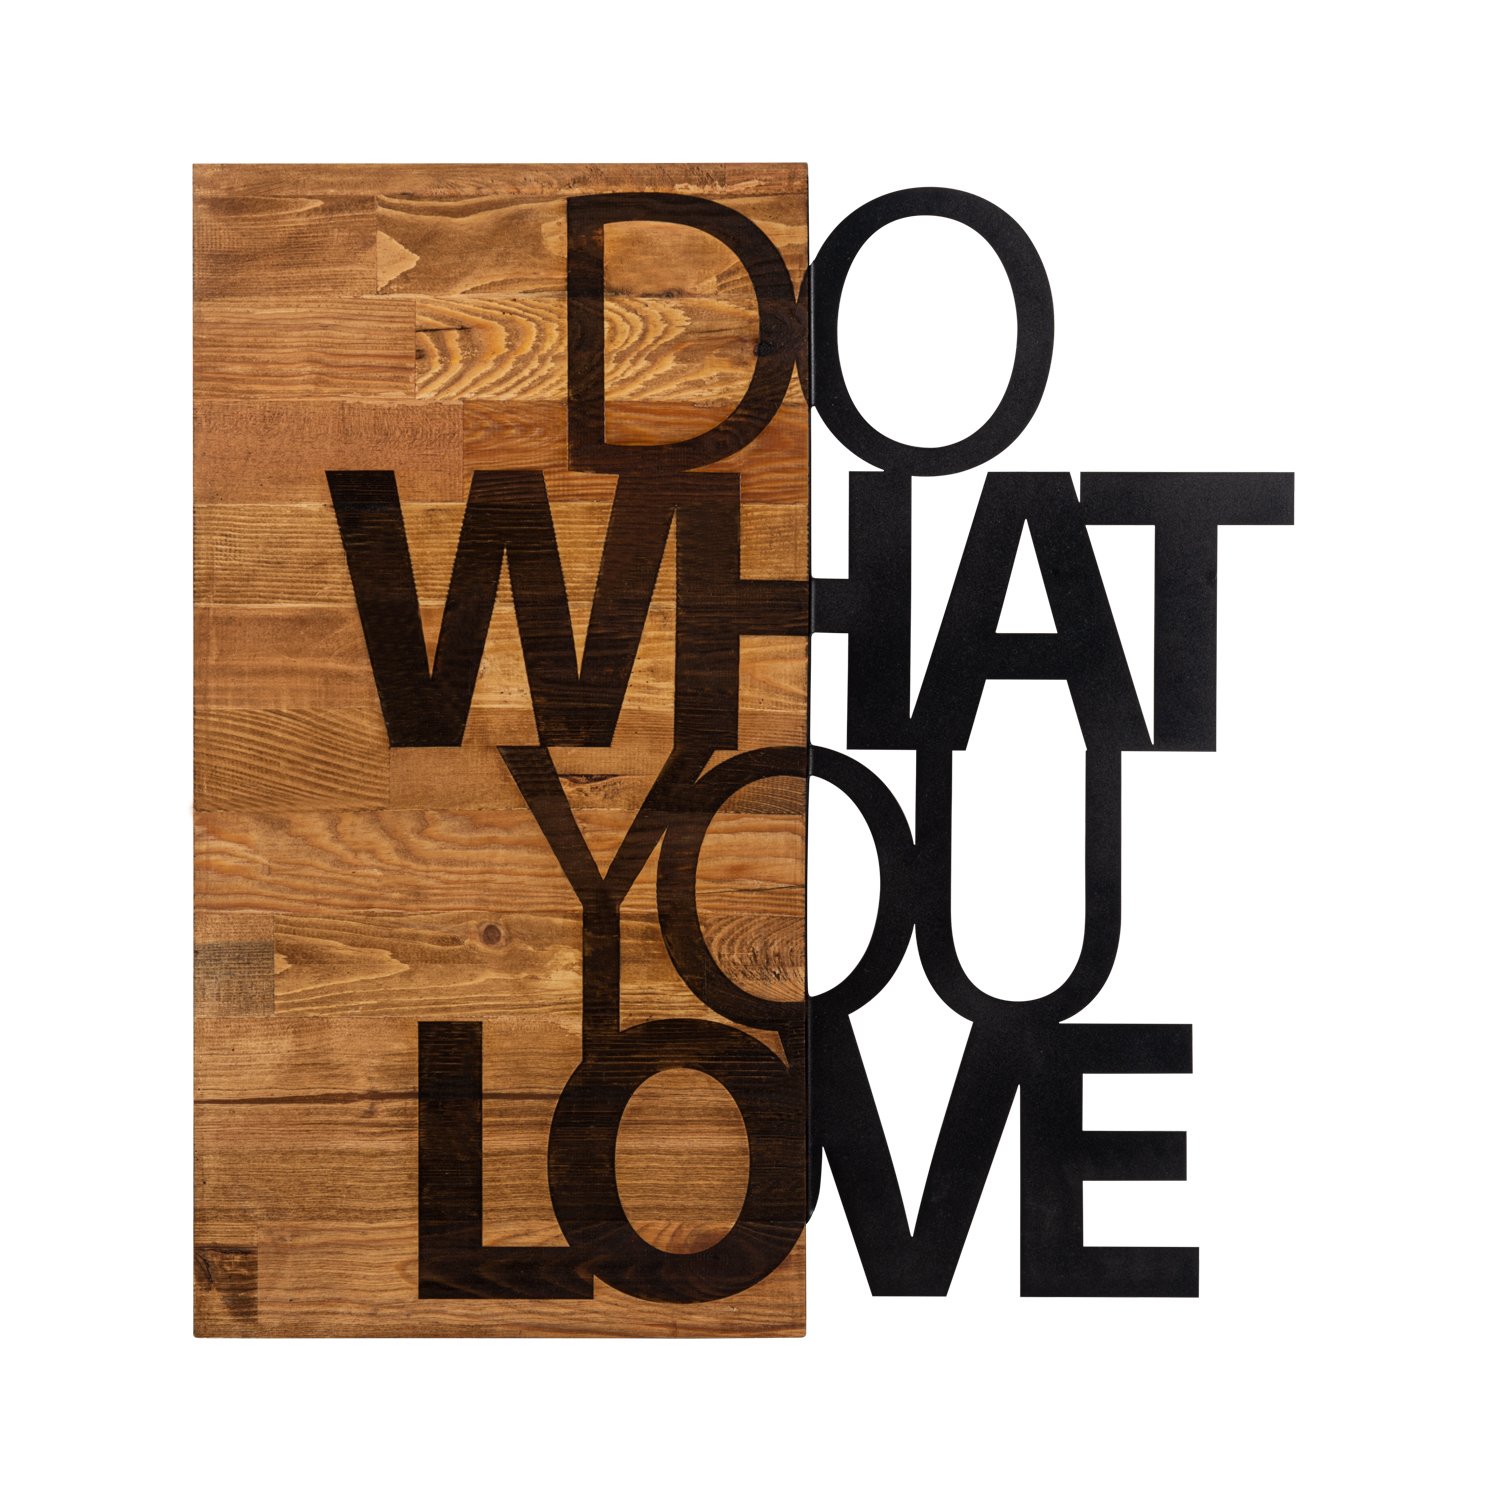 DO WHAT YOU LOVE